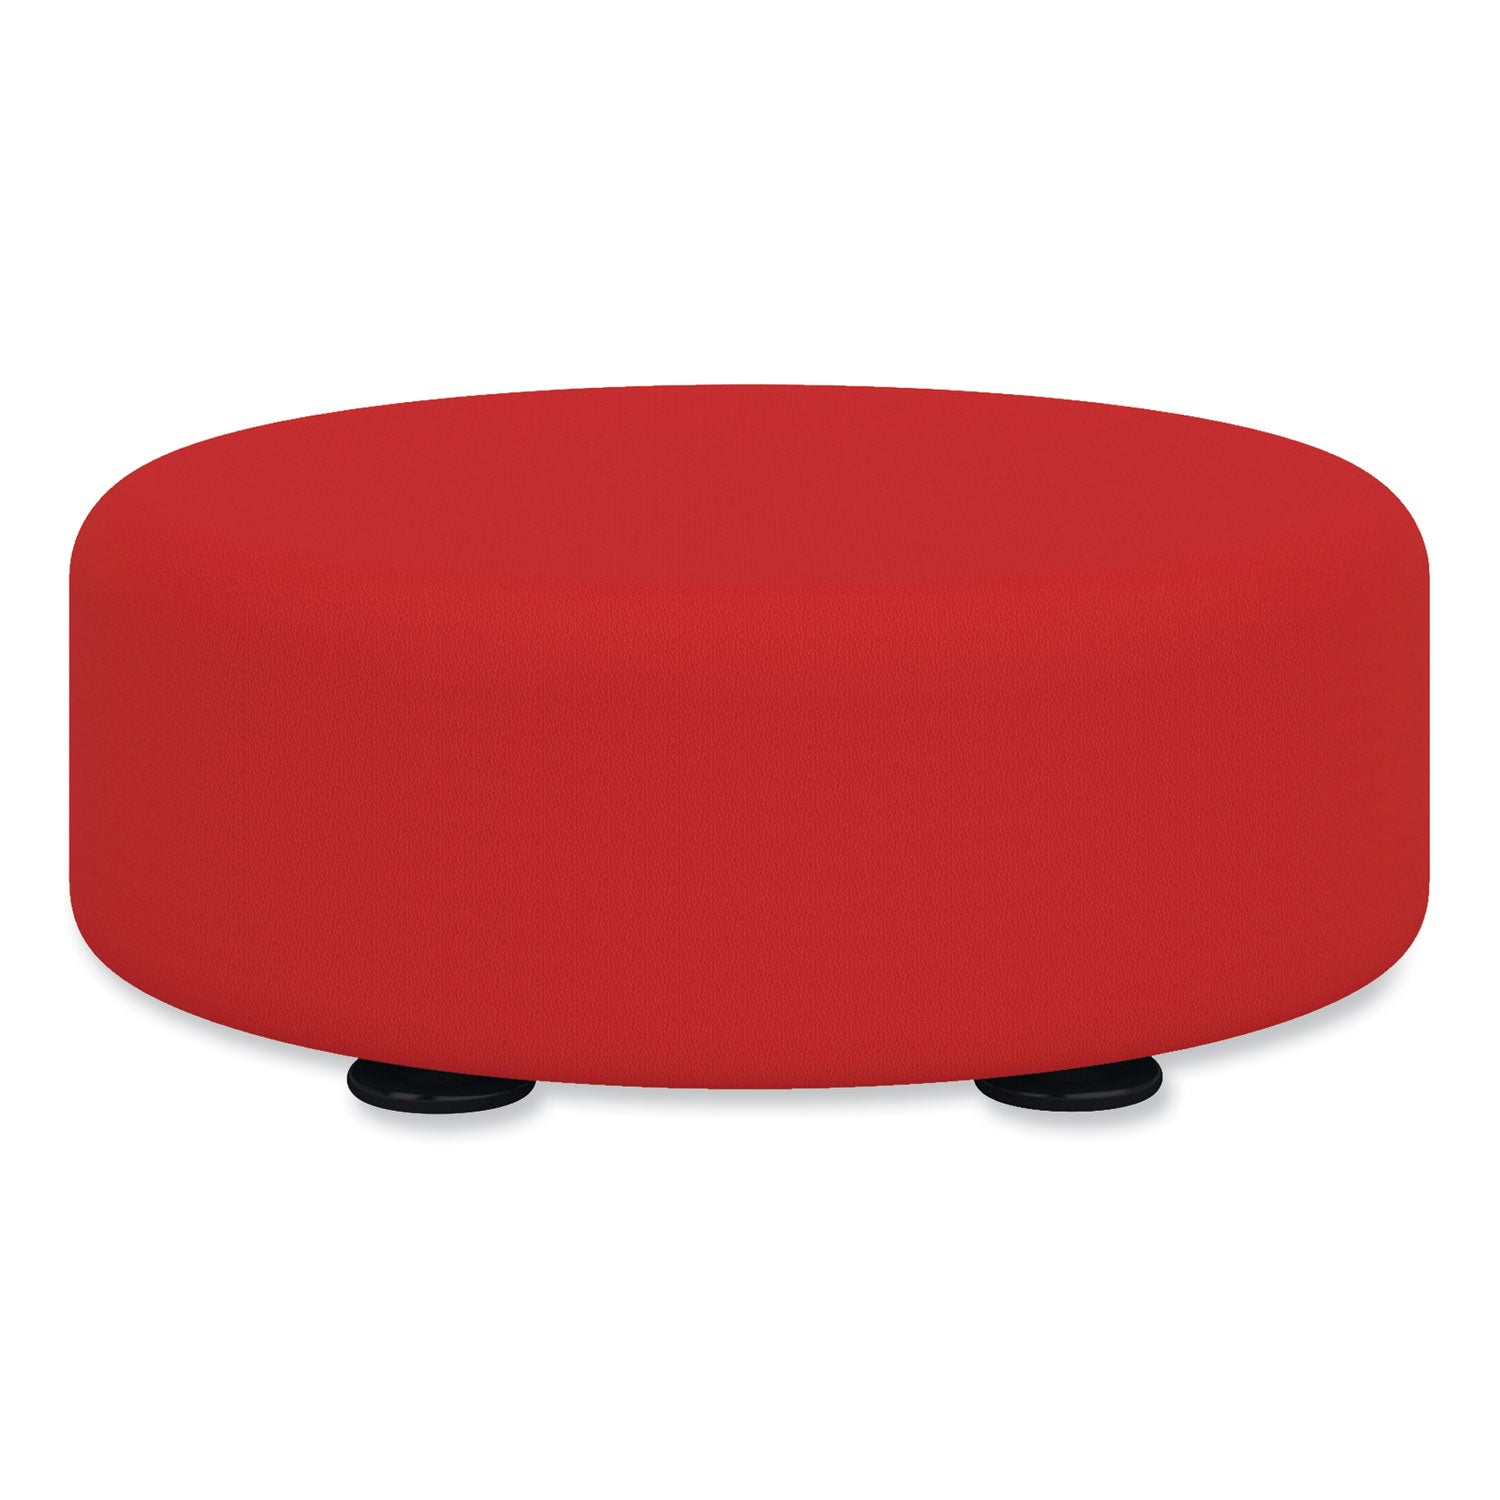 learn-15-round-vinyl-floor-seat-15-dia-x-575h-red-ships-in-1-3-business-days_saf8121rv - 1